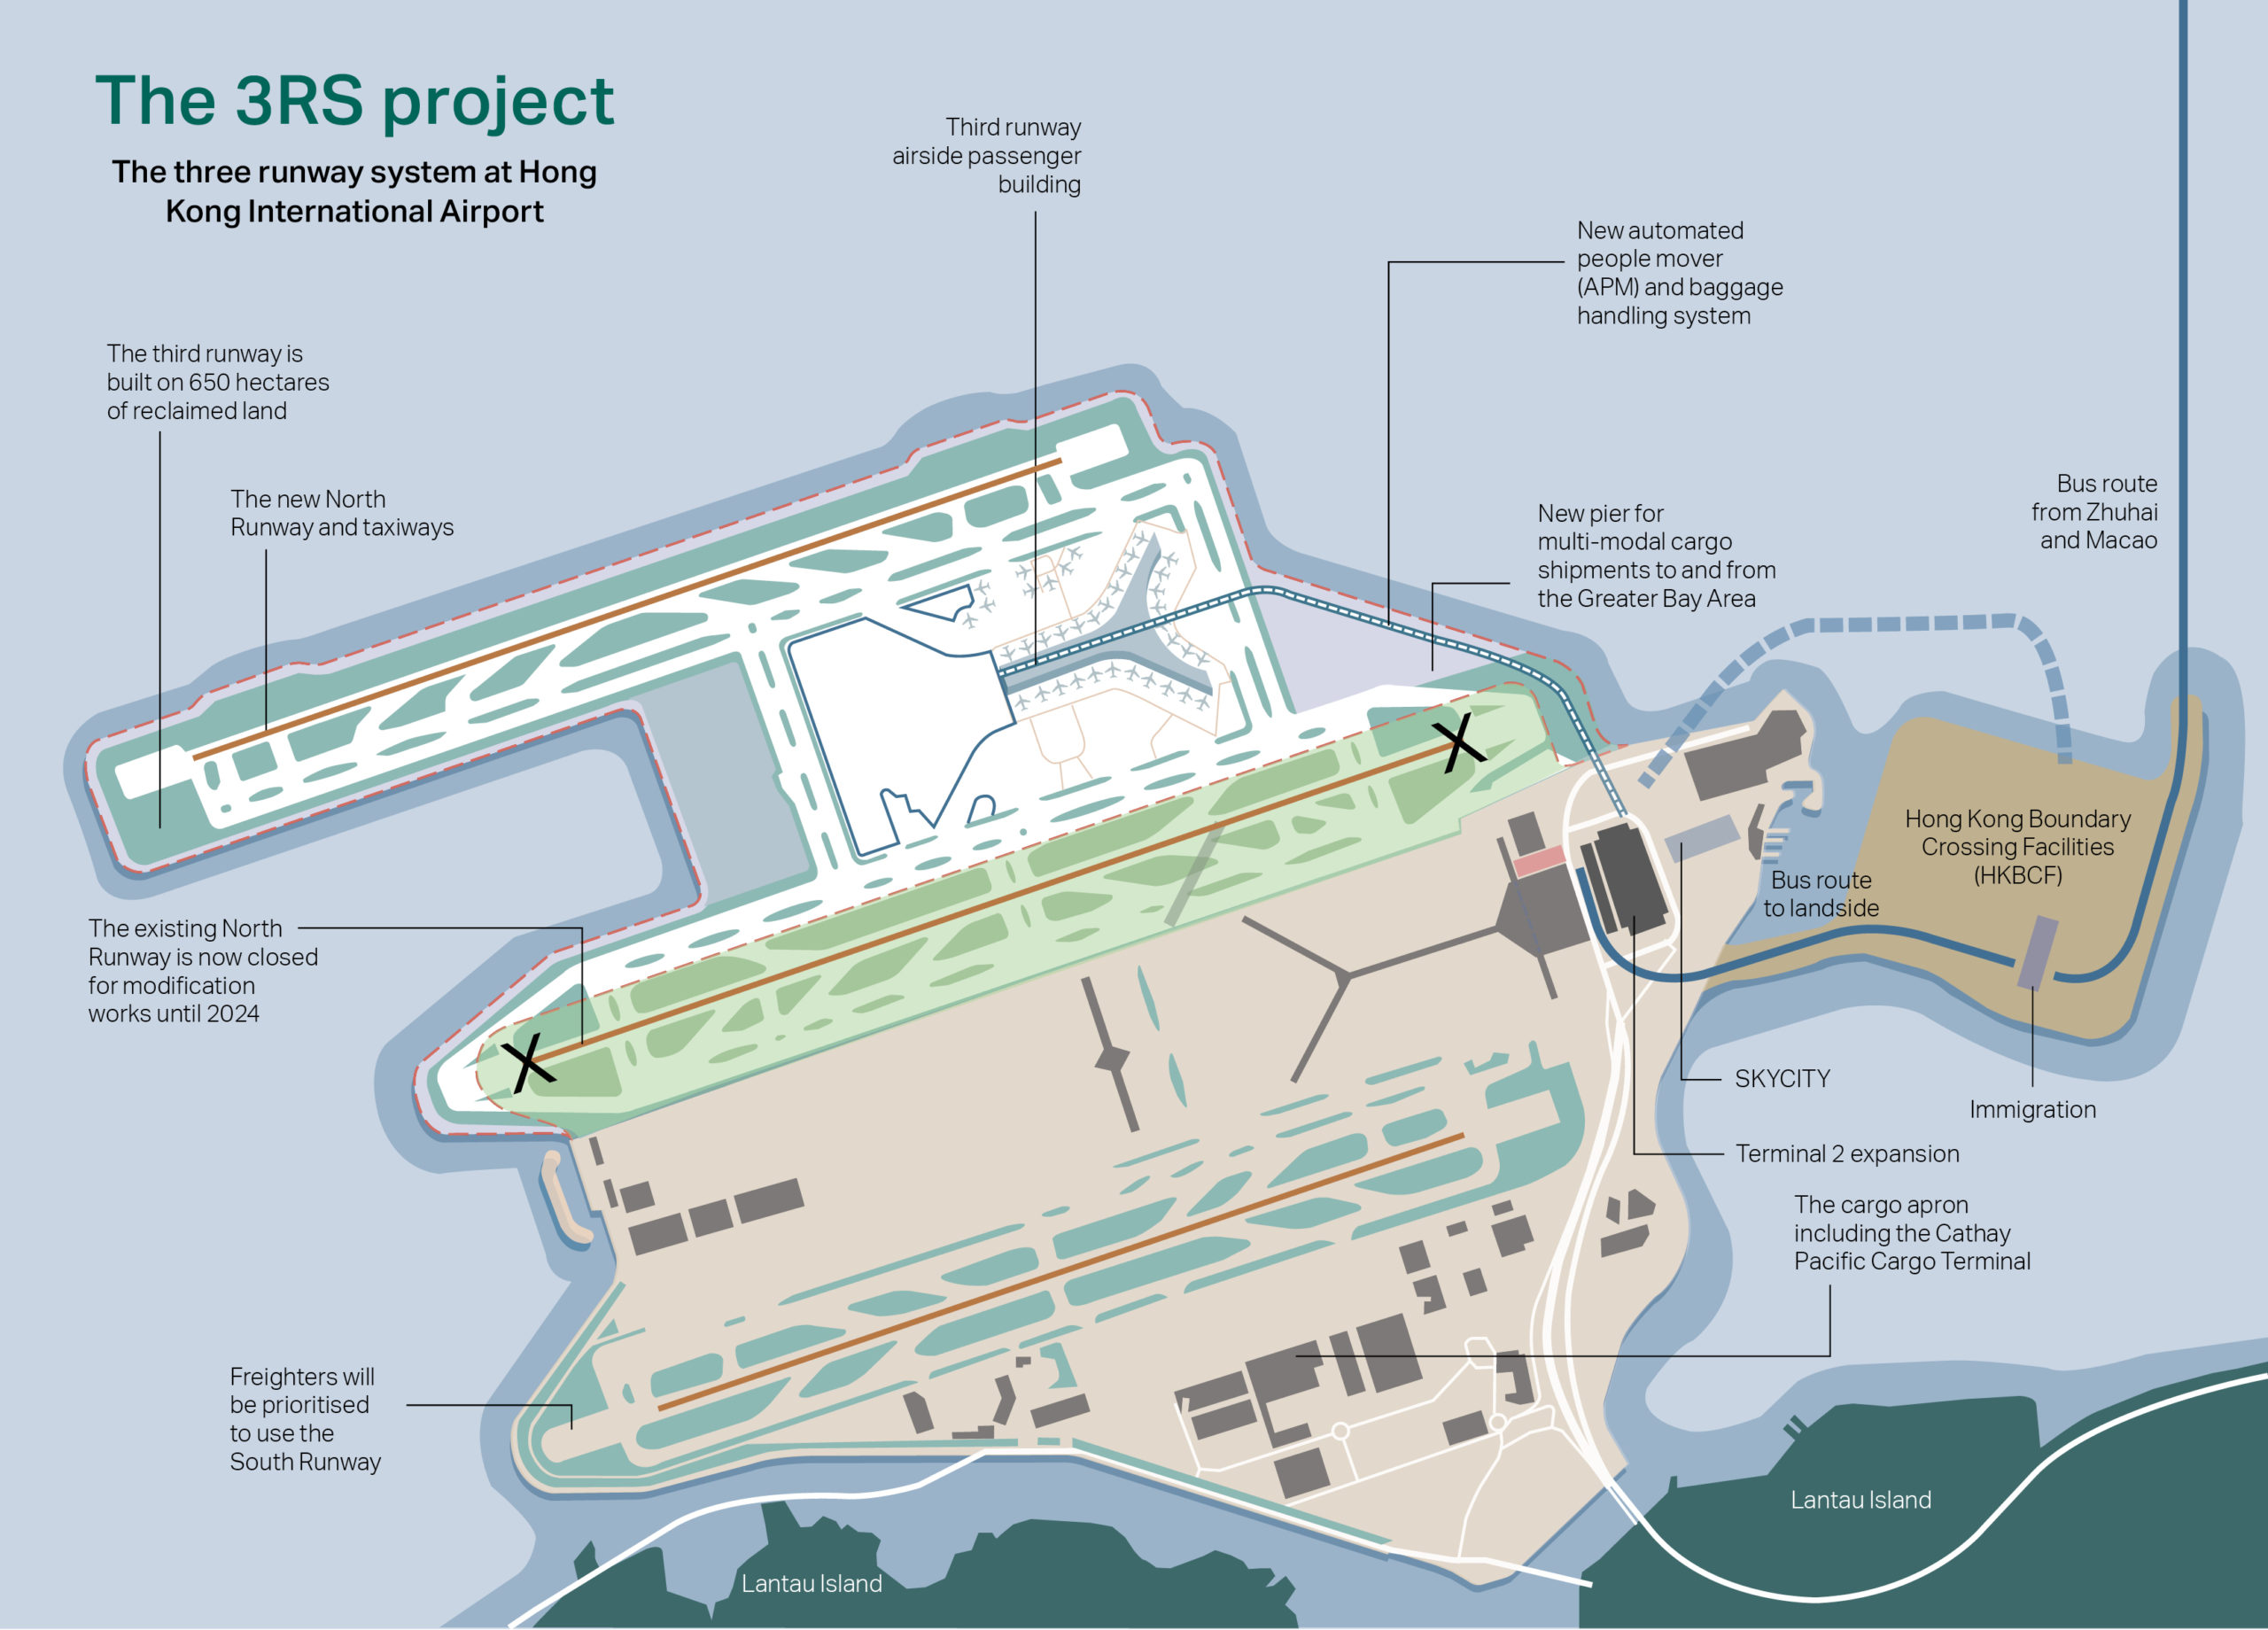 An infographic map showing the progress of the third runway project at Hong Kong International Airport